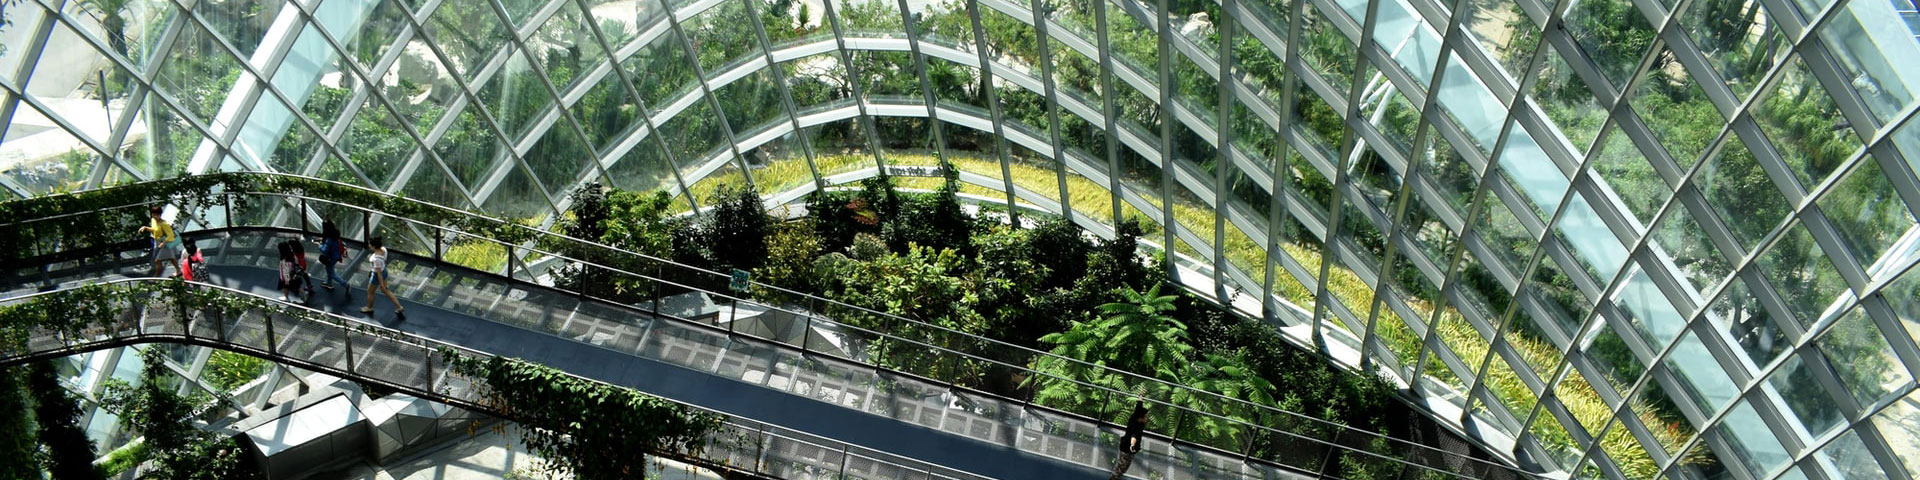 Inside a glass building with trees and plants growing inside